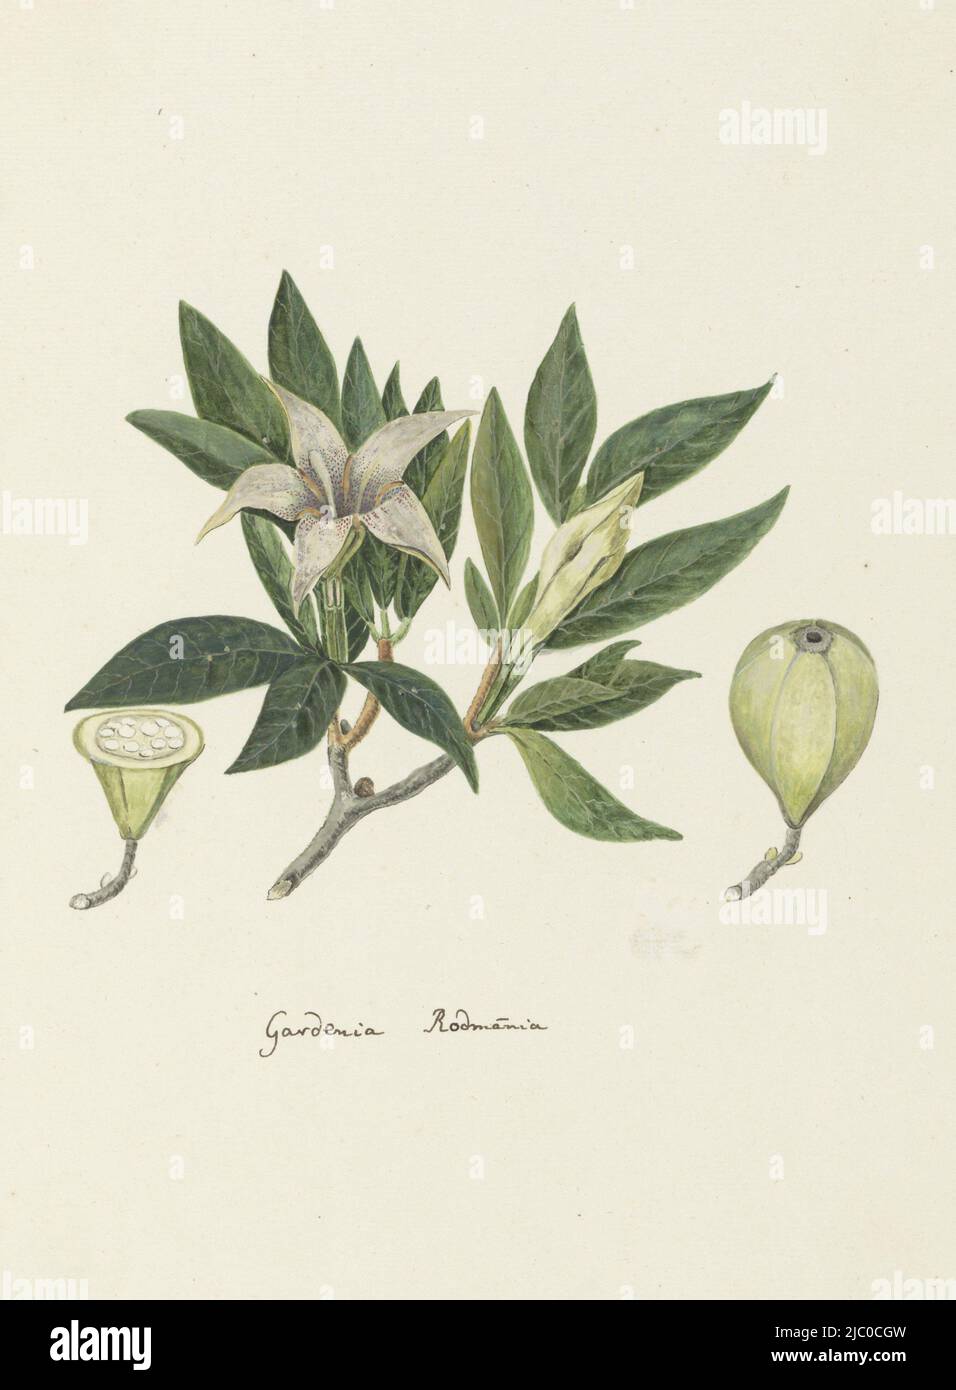 Rothmannia capensis Thunb. (website, Raper& Boucher), gardenia capensis Druce (Dyer), occurs in the native forests of the southern Cape Province, Rothmannia capensis Thunb, formerly gardenia capensis Druce (Wild Gardenia or common Rothmannia)., draughtsman: Robert Jacob Gordon, Oct-1777 - Mar-1786, paper, pen, brush, h 660 mm × w 480 mm, h 327 mm × w 240 mm Stock Photo